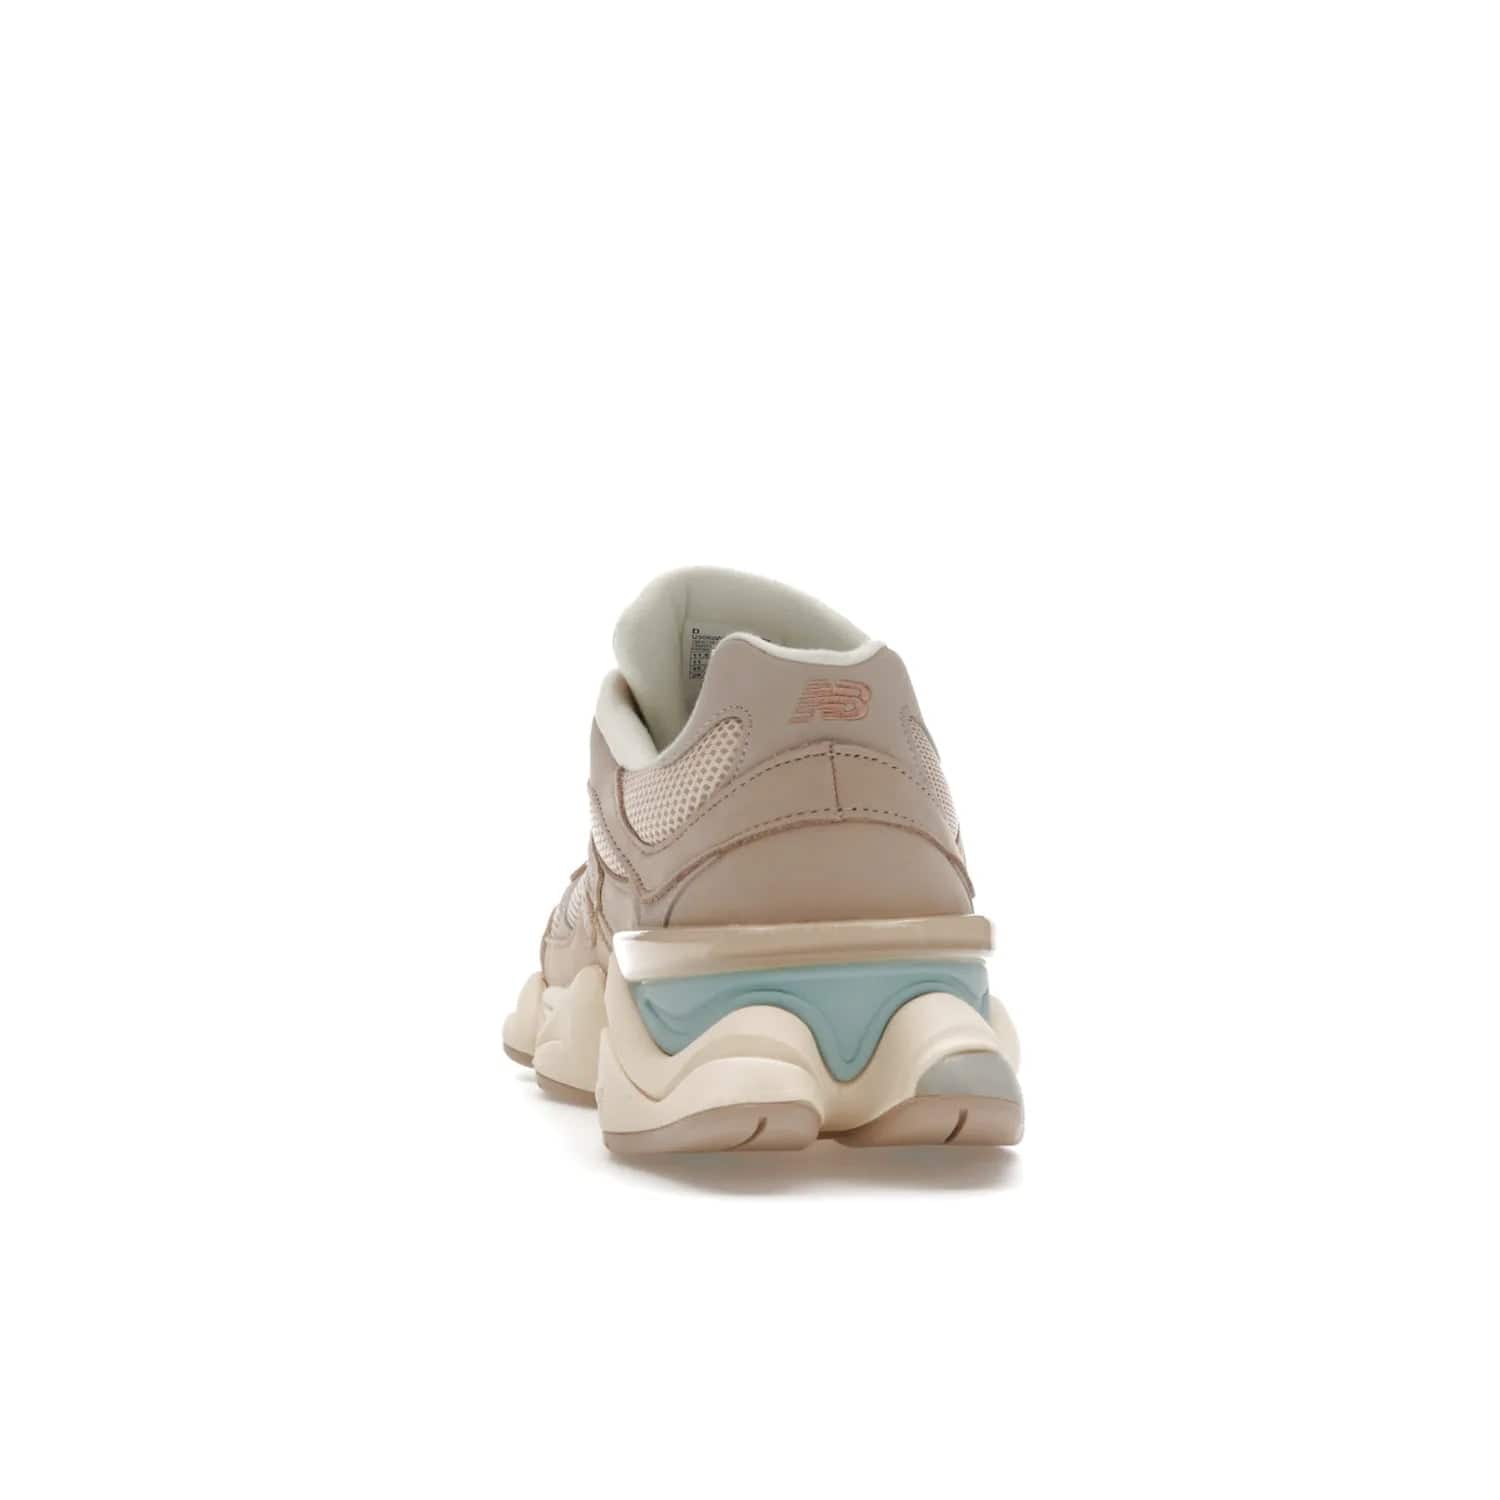 New Balance 9060 Ivory Cream Pink Sand - Image 27 - Only at www.BallersClubKickz.com - New Balance 9060 Ivory Cream Pink Sand - Sleek meshed upper, premium suede overlays, ABZORB cushioning. Get this unique sneaker ahead of the trend, launching December 6th, 2022!